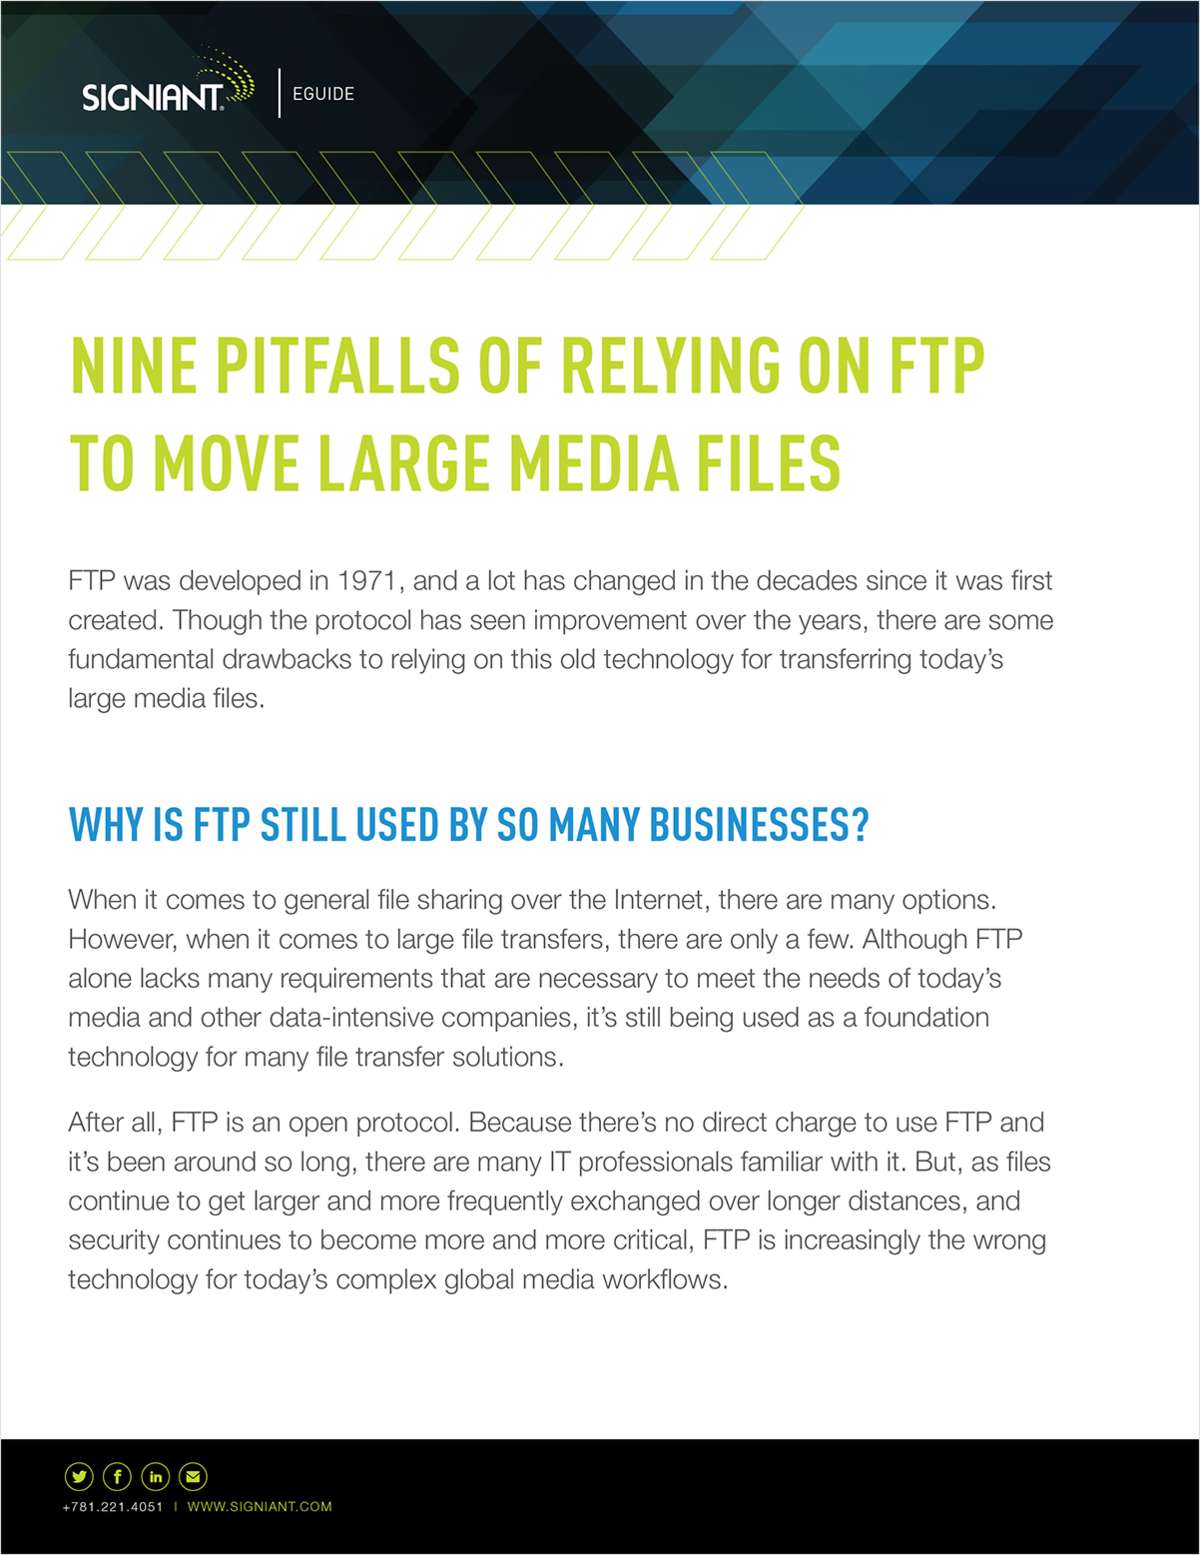 NINE PITFALLS OF RELYING ON FTP TO MOVE LARGE MEDIA FILES